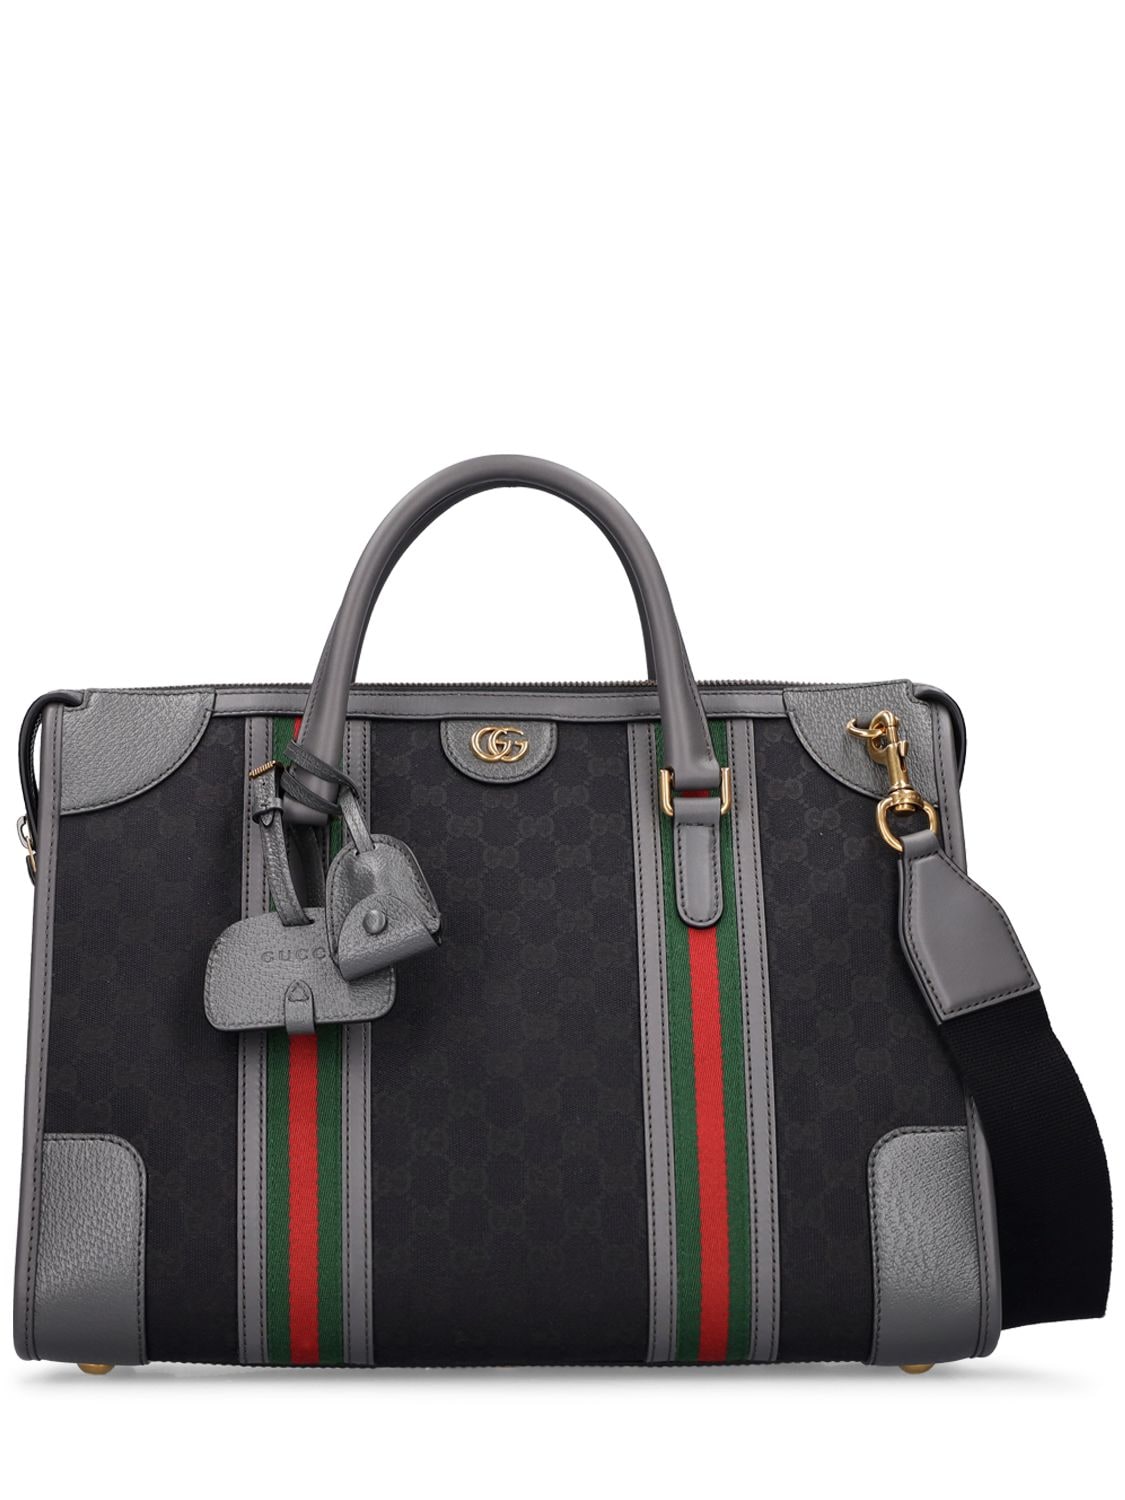 Gucci Bauletto Gg Canvas Carry-on Bag